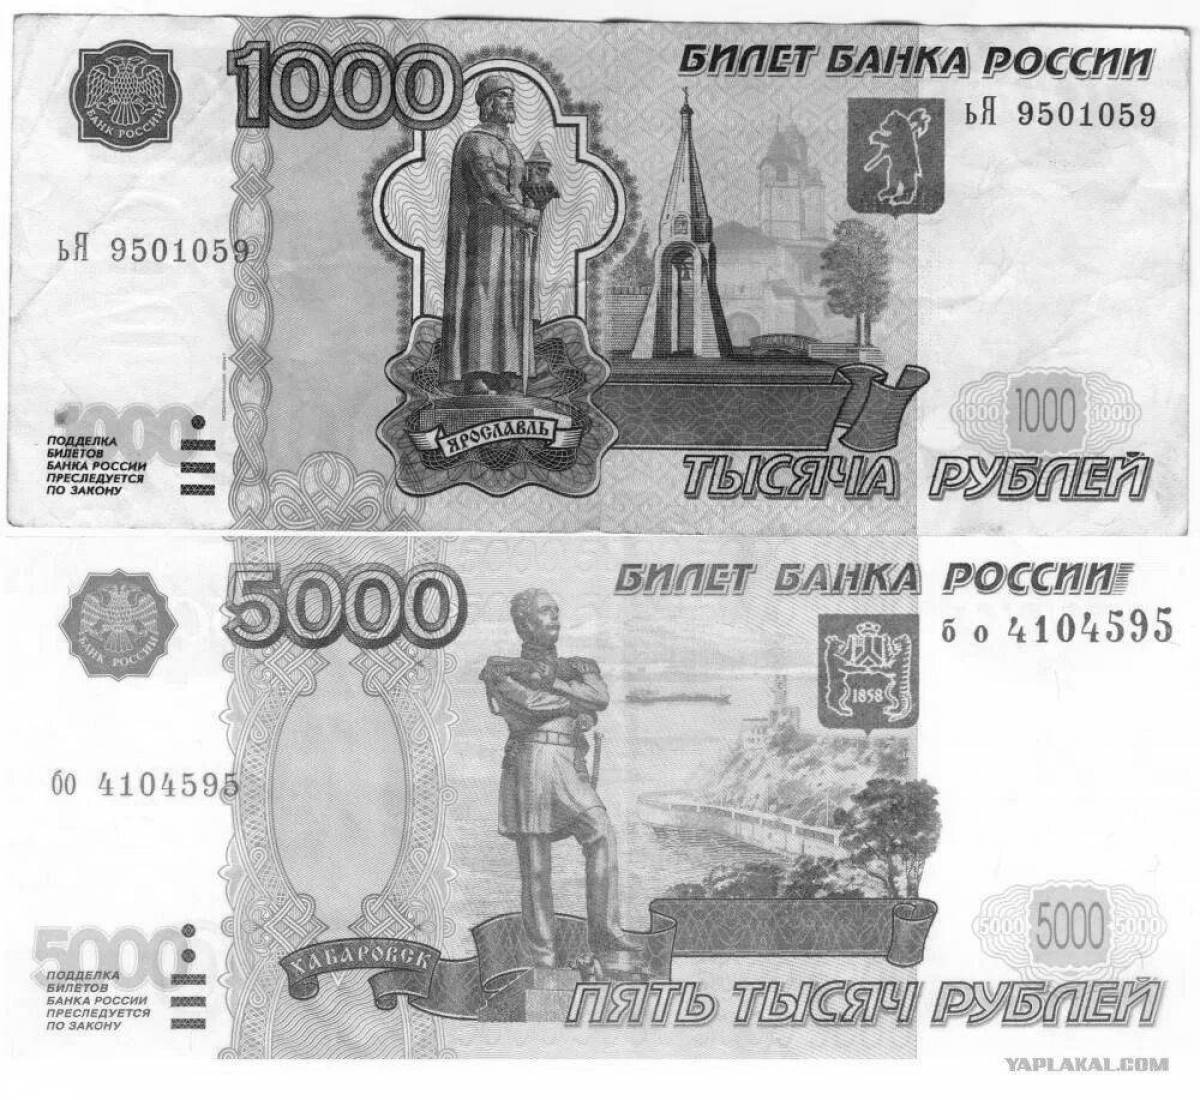 5000 rubles #11